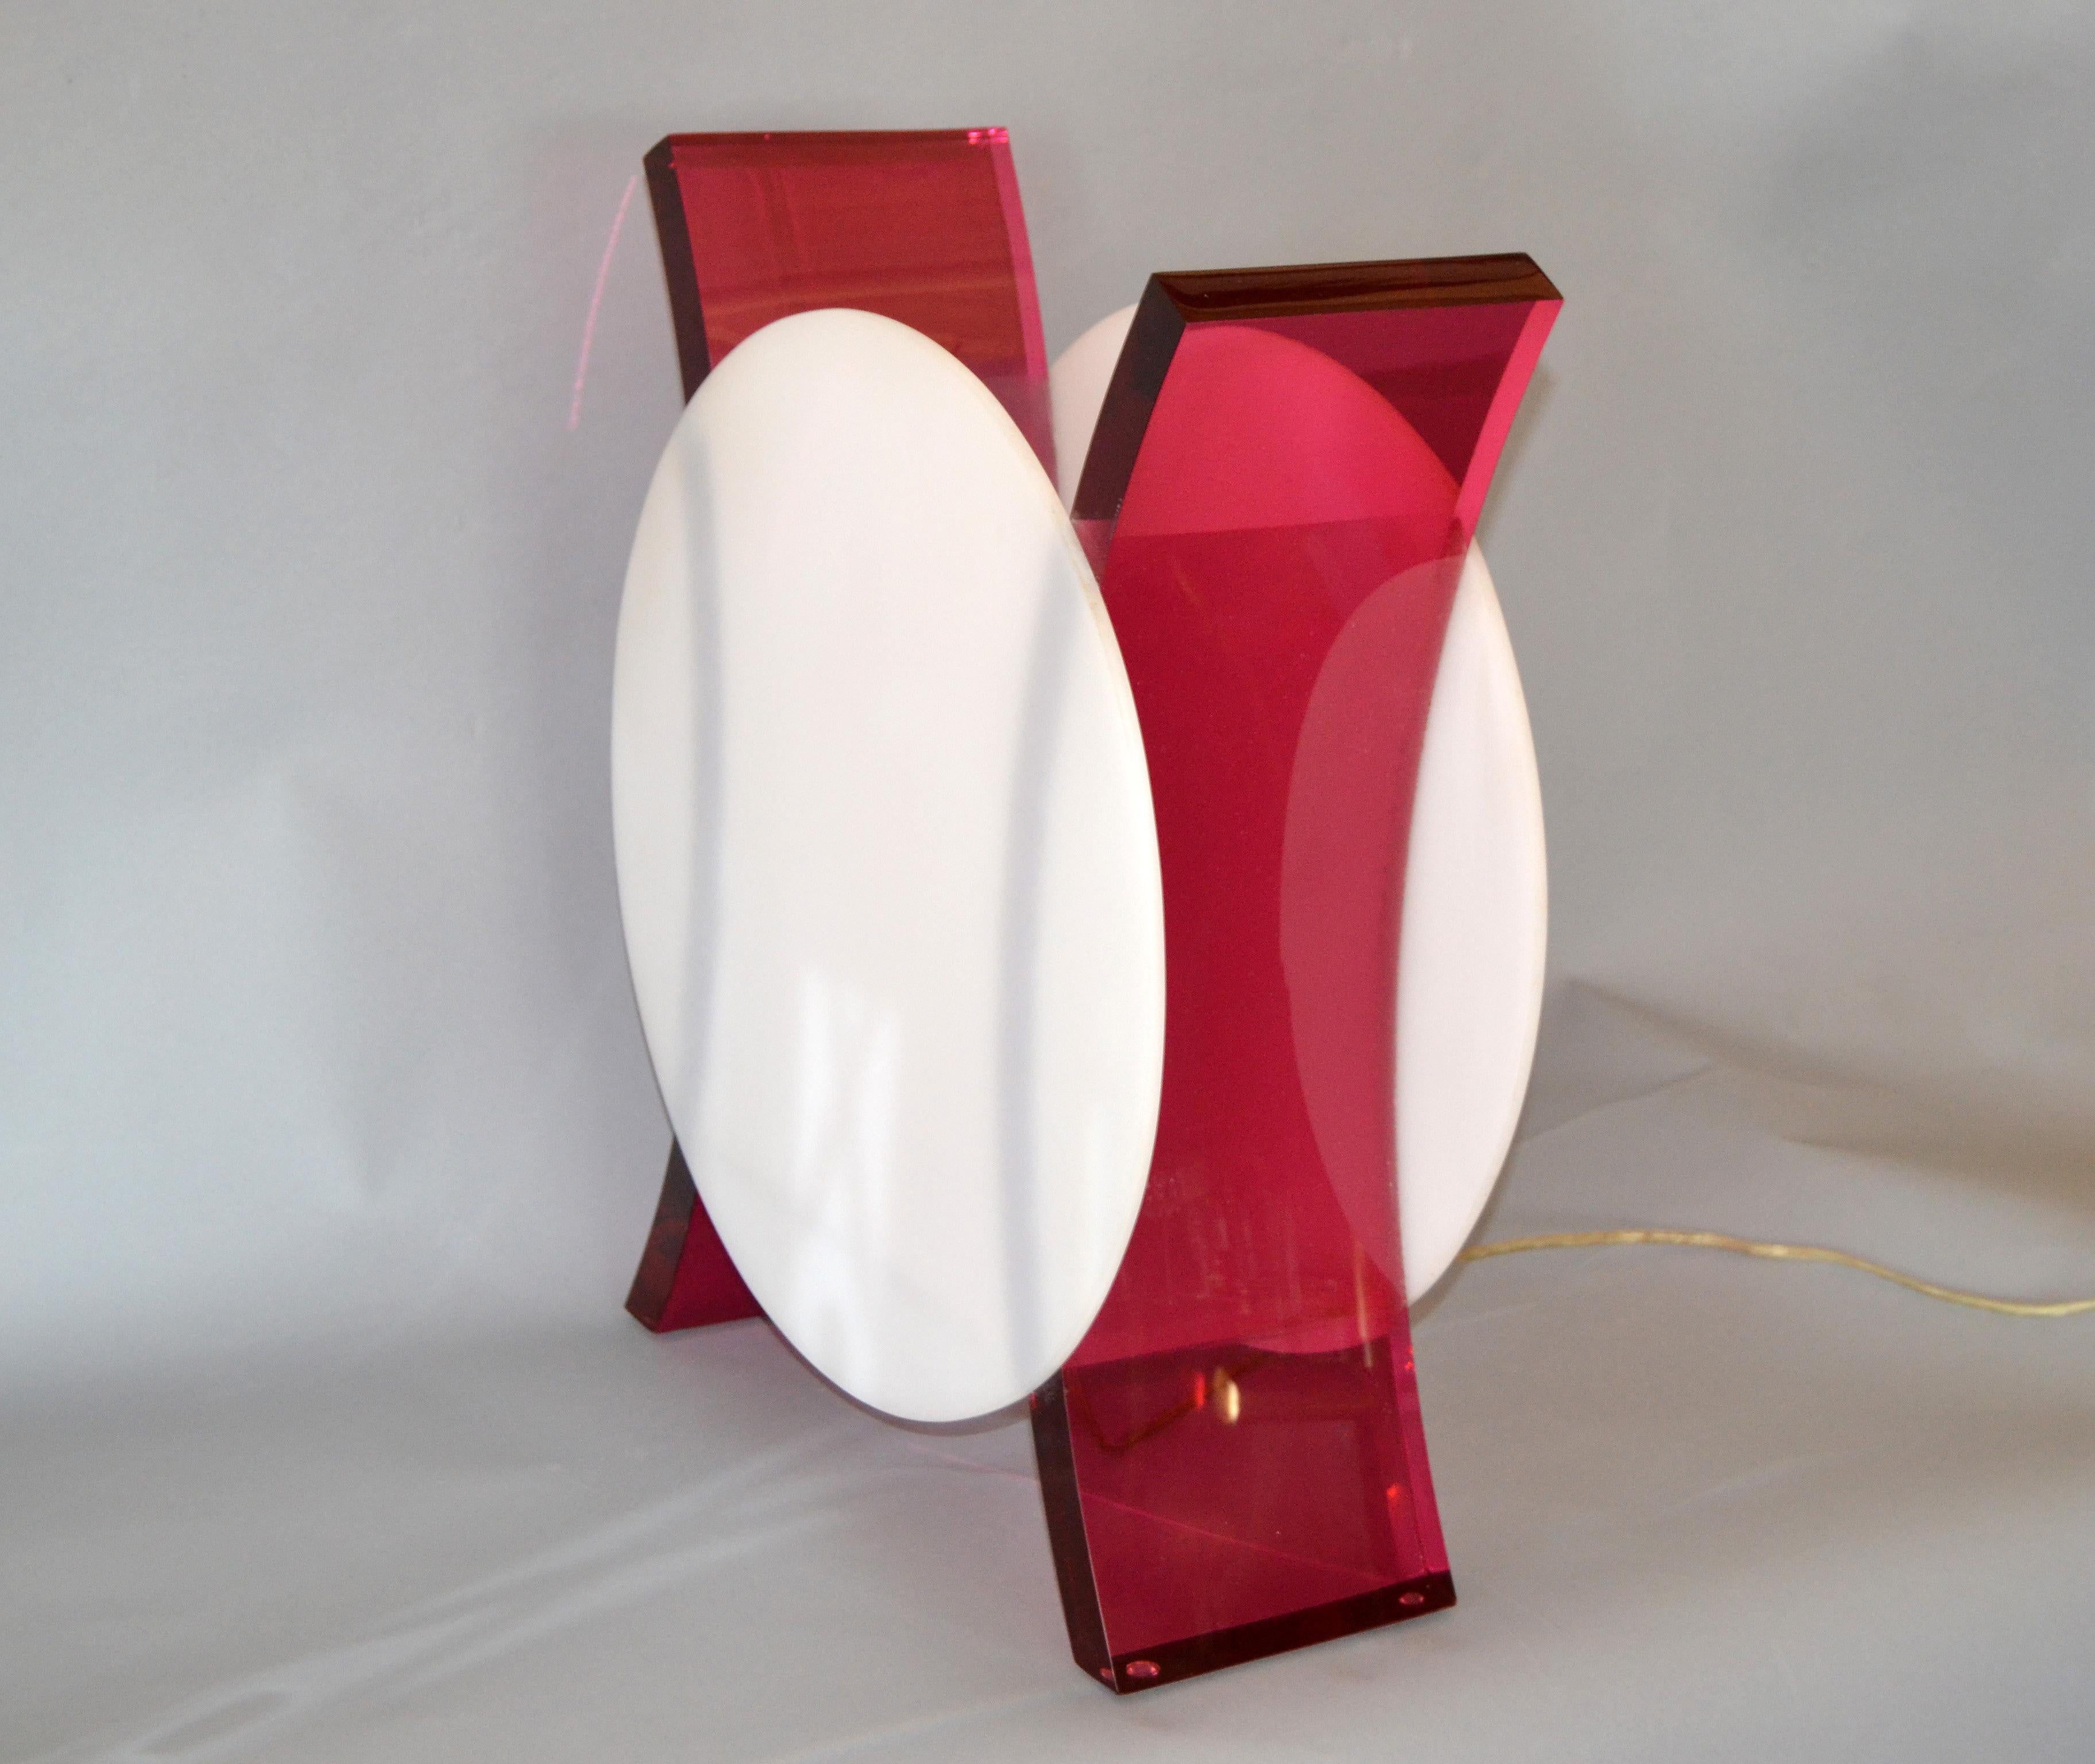 Mid-Century Modern white and pink acrylic sculptural table lamp.
The lamp has two round white discs and is sculptural framed on a pink base.
It takes one max. 75 watts light bulb.
In perfect working condition and wired for the U.S.
  